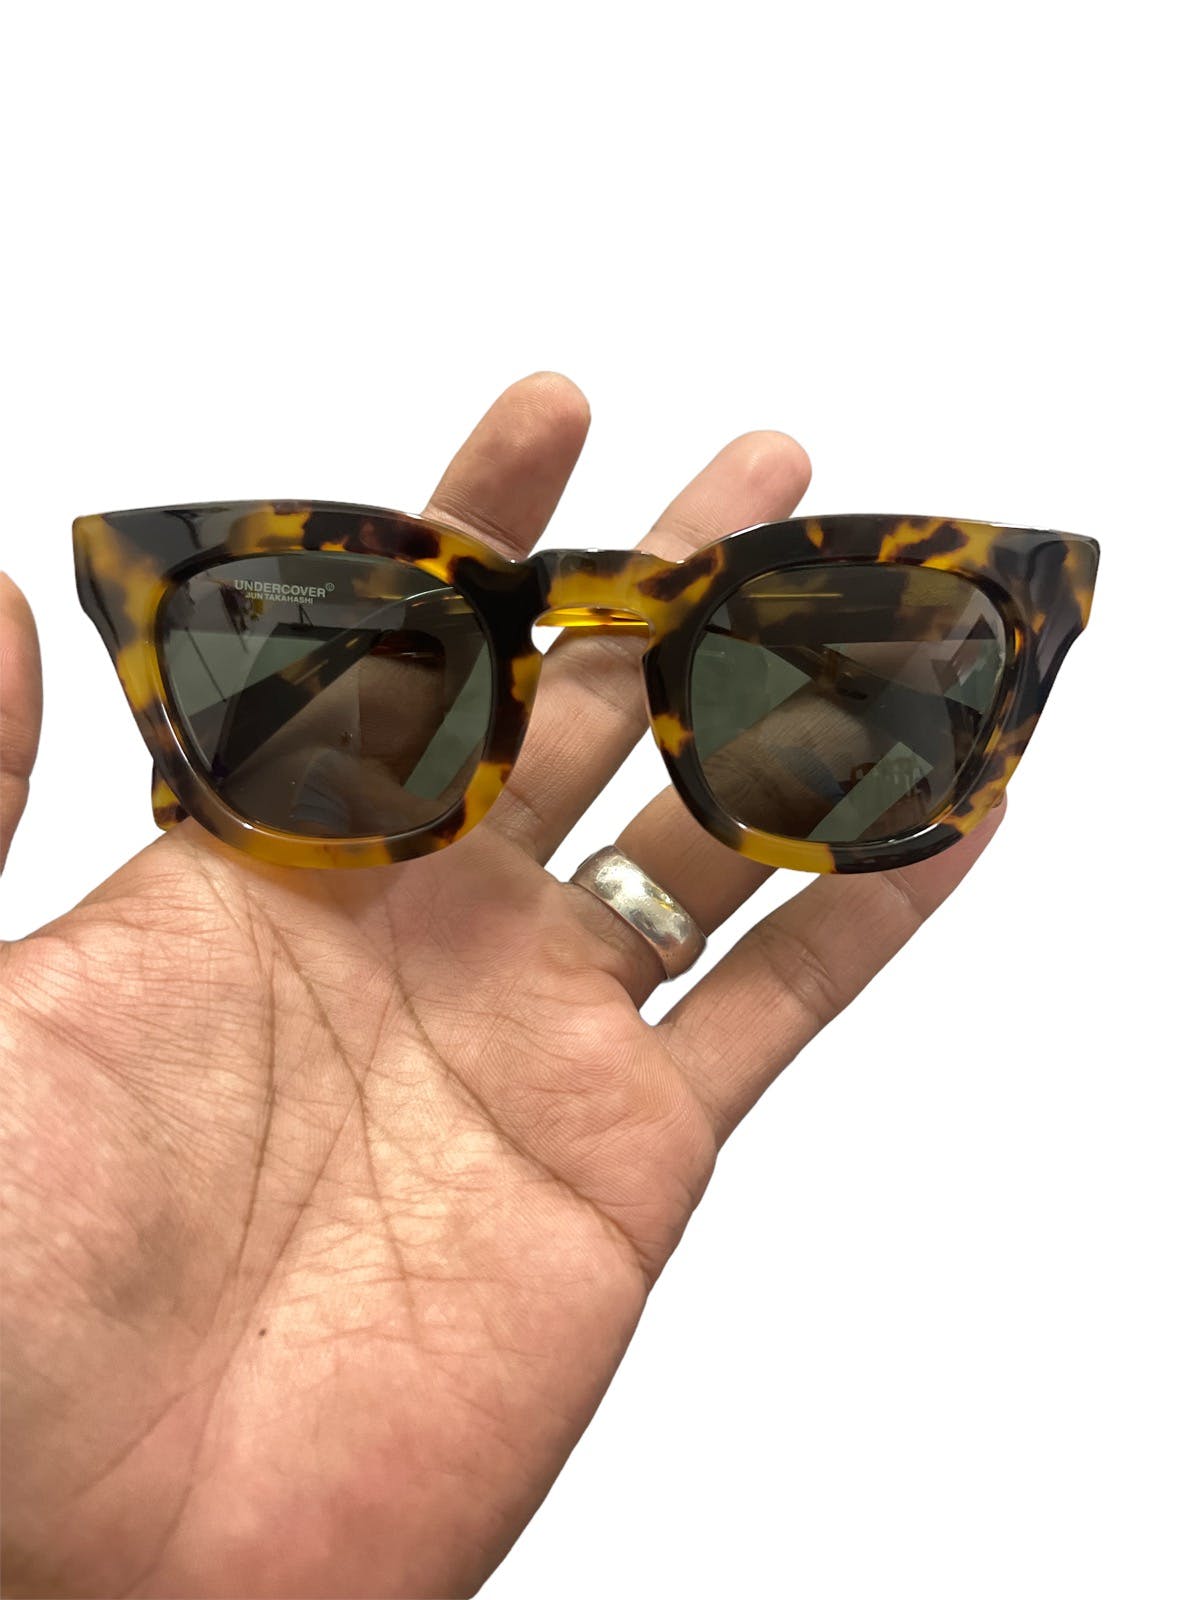 UNDERCOVER LEOPARD CAT EYES SUNGLASSES Made in Japan - 4